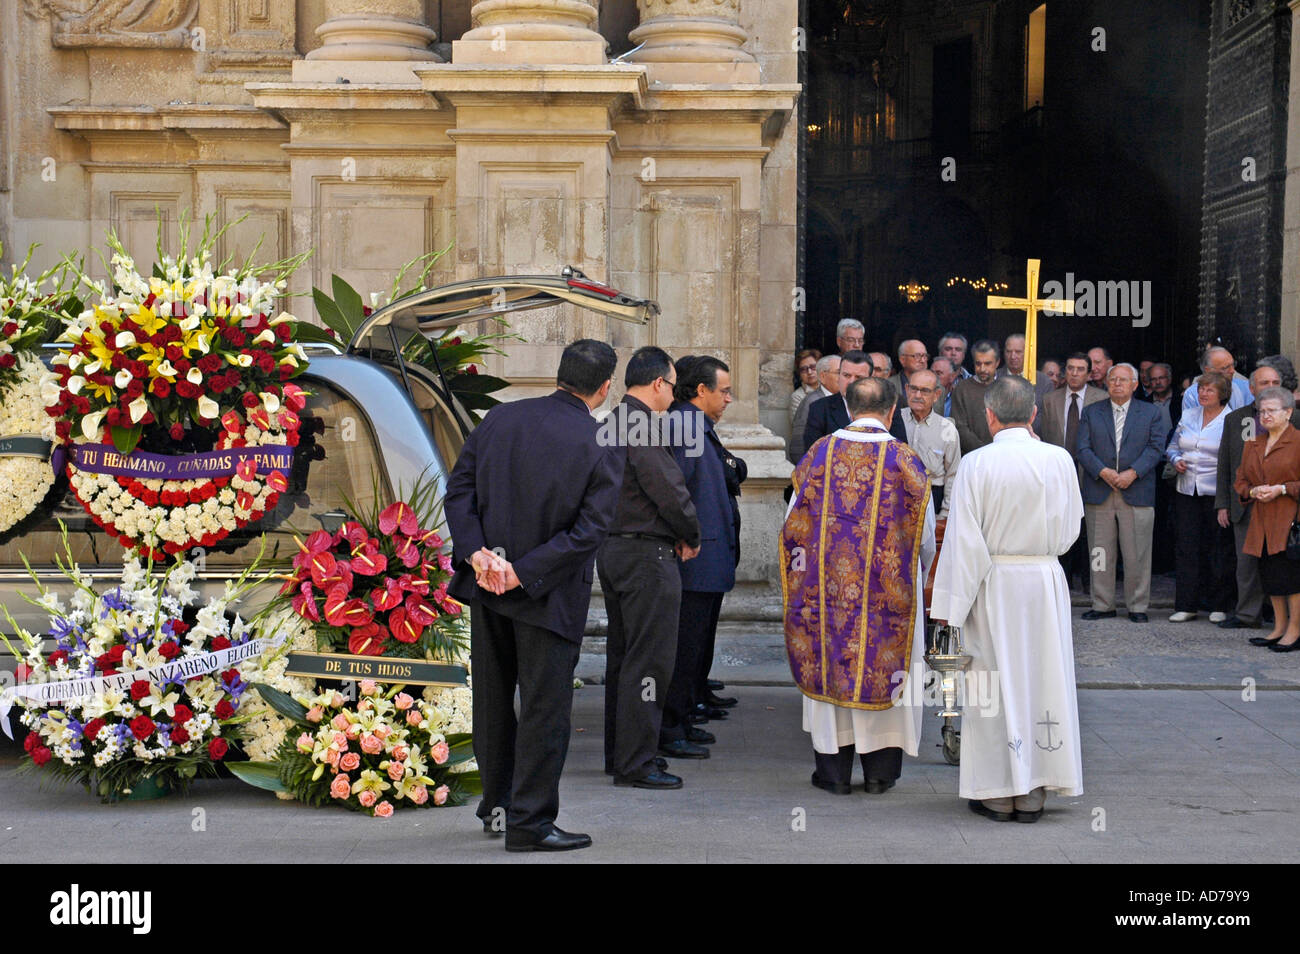 Priest with golden cross and fuenral guests coming out of the church at a funeral, hearse with mourning wreaths Stock Photo